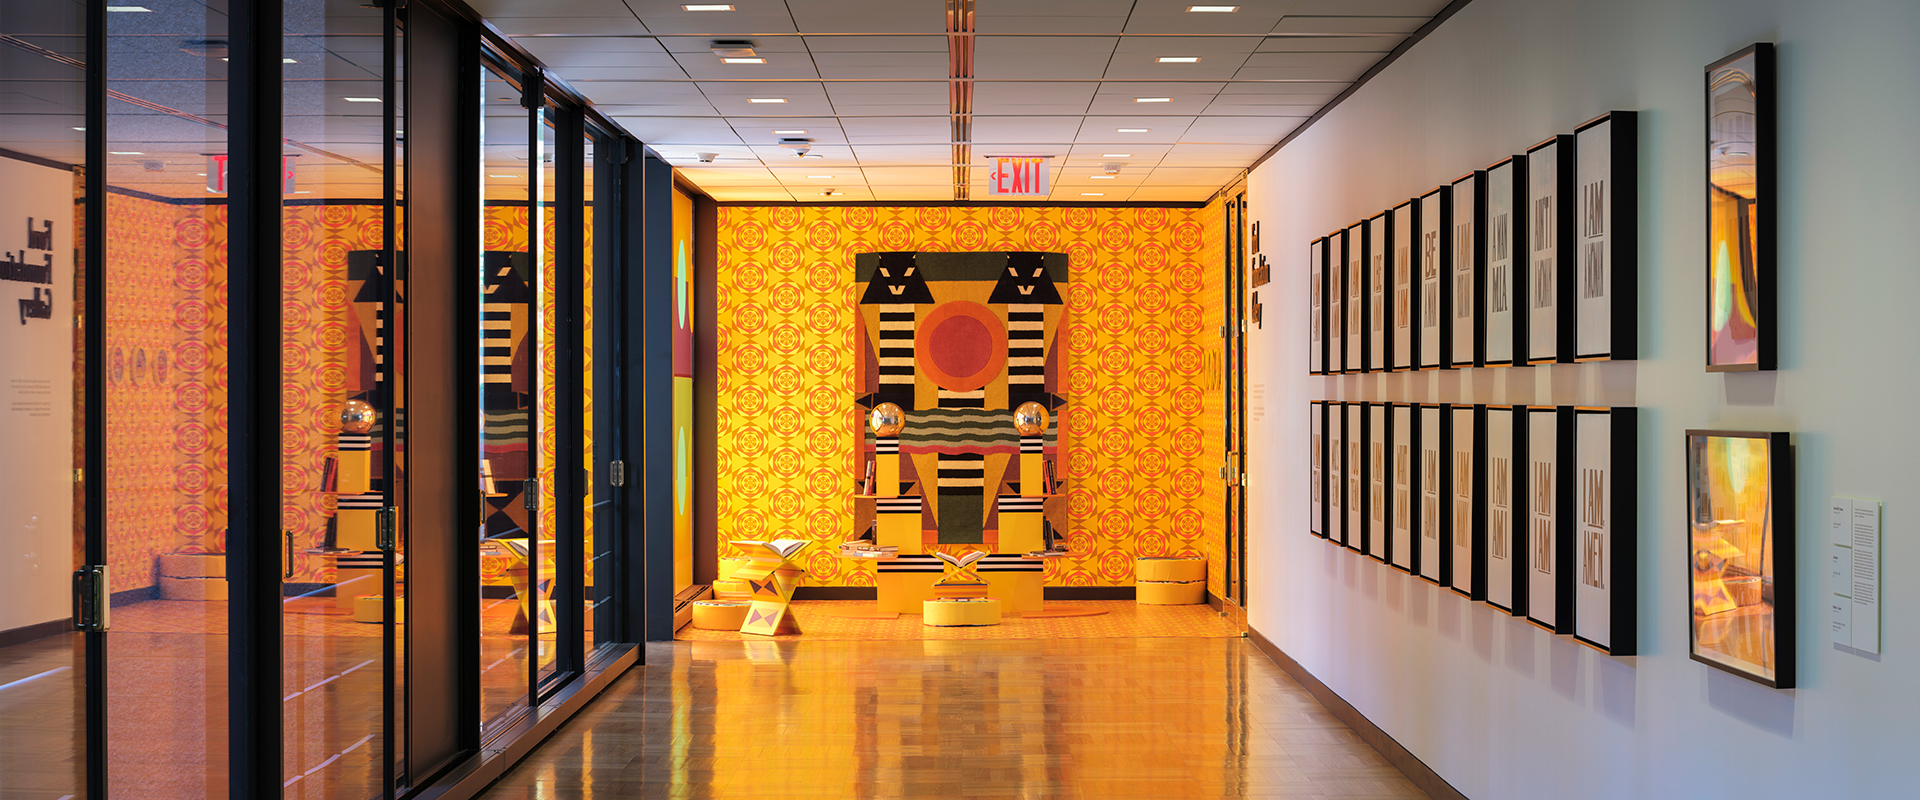 An installation on two walls, a large window, and a section of floor at the end of a hallway. There are wallpapered elements in geometric patterns on all surfaces. A rug hangs vertically on the back wall and there are two sculpted pillars on the floor at waist height.